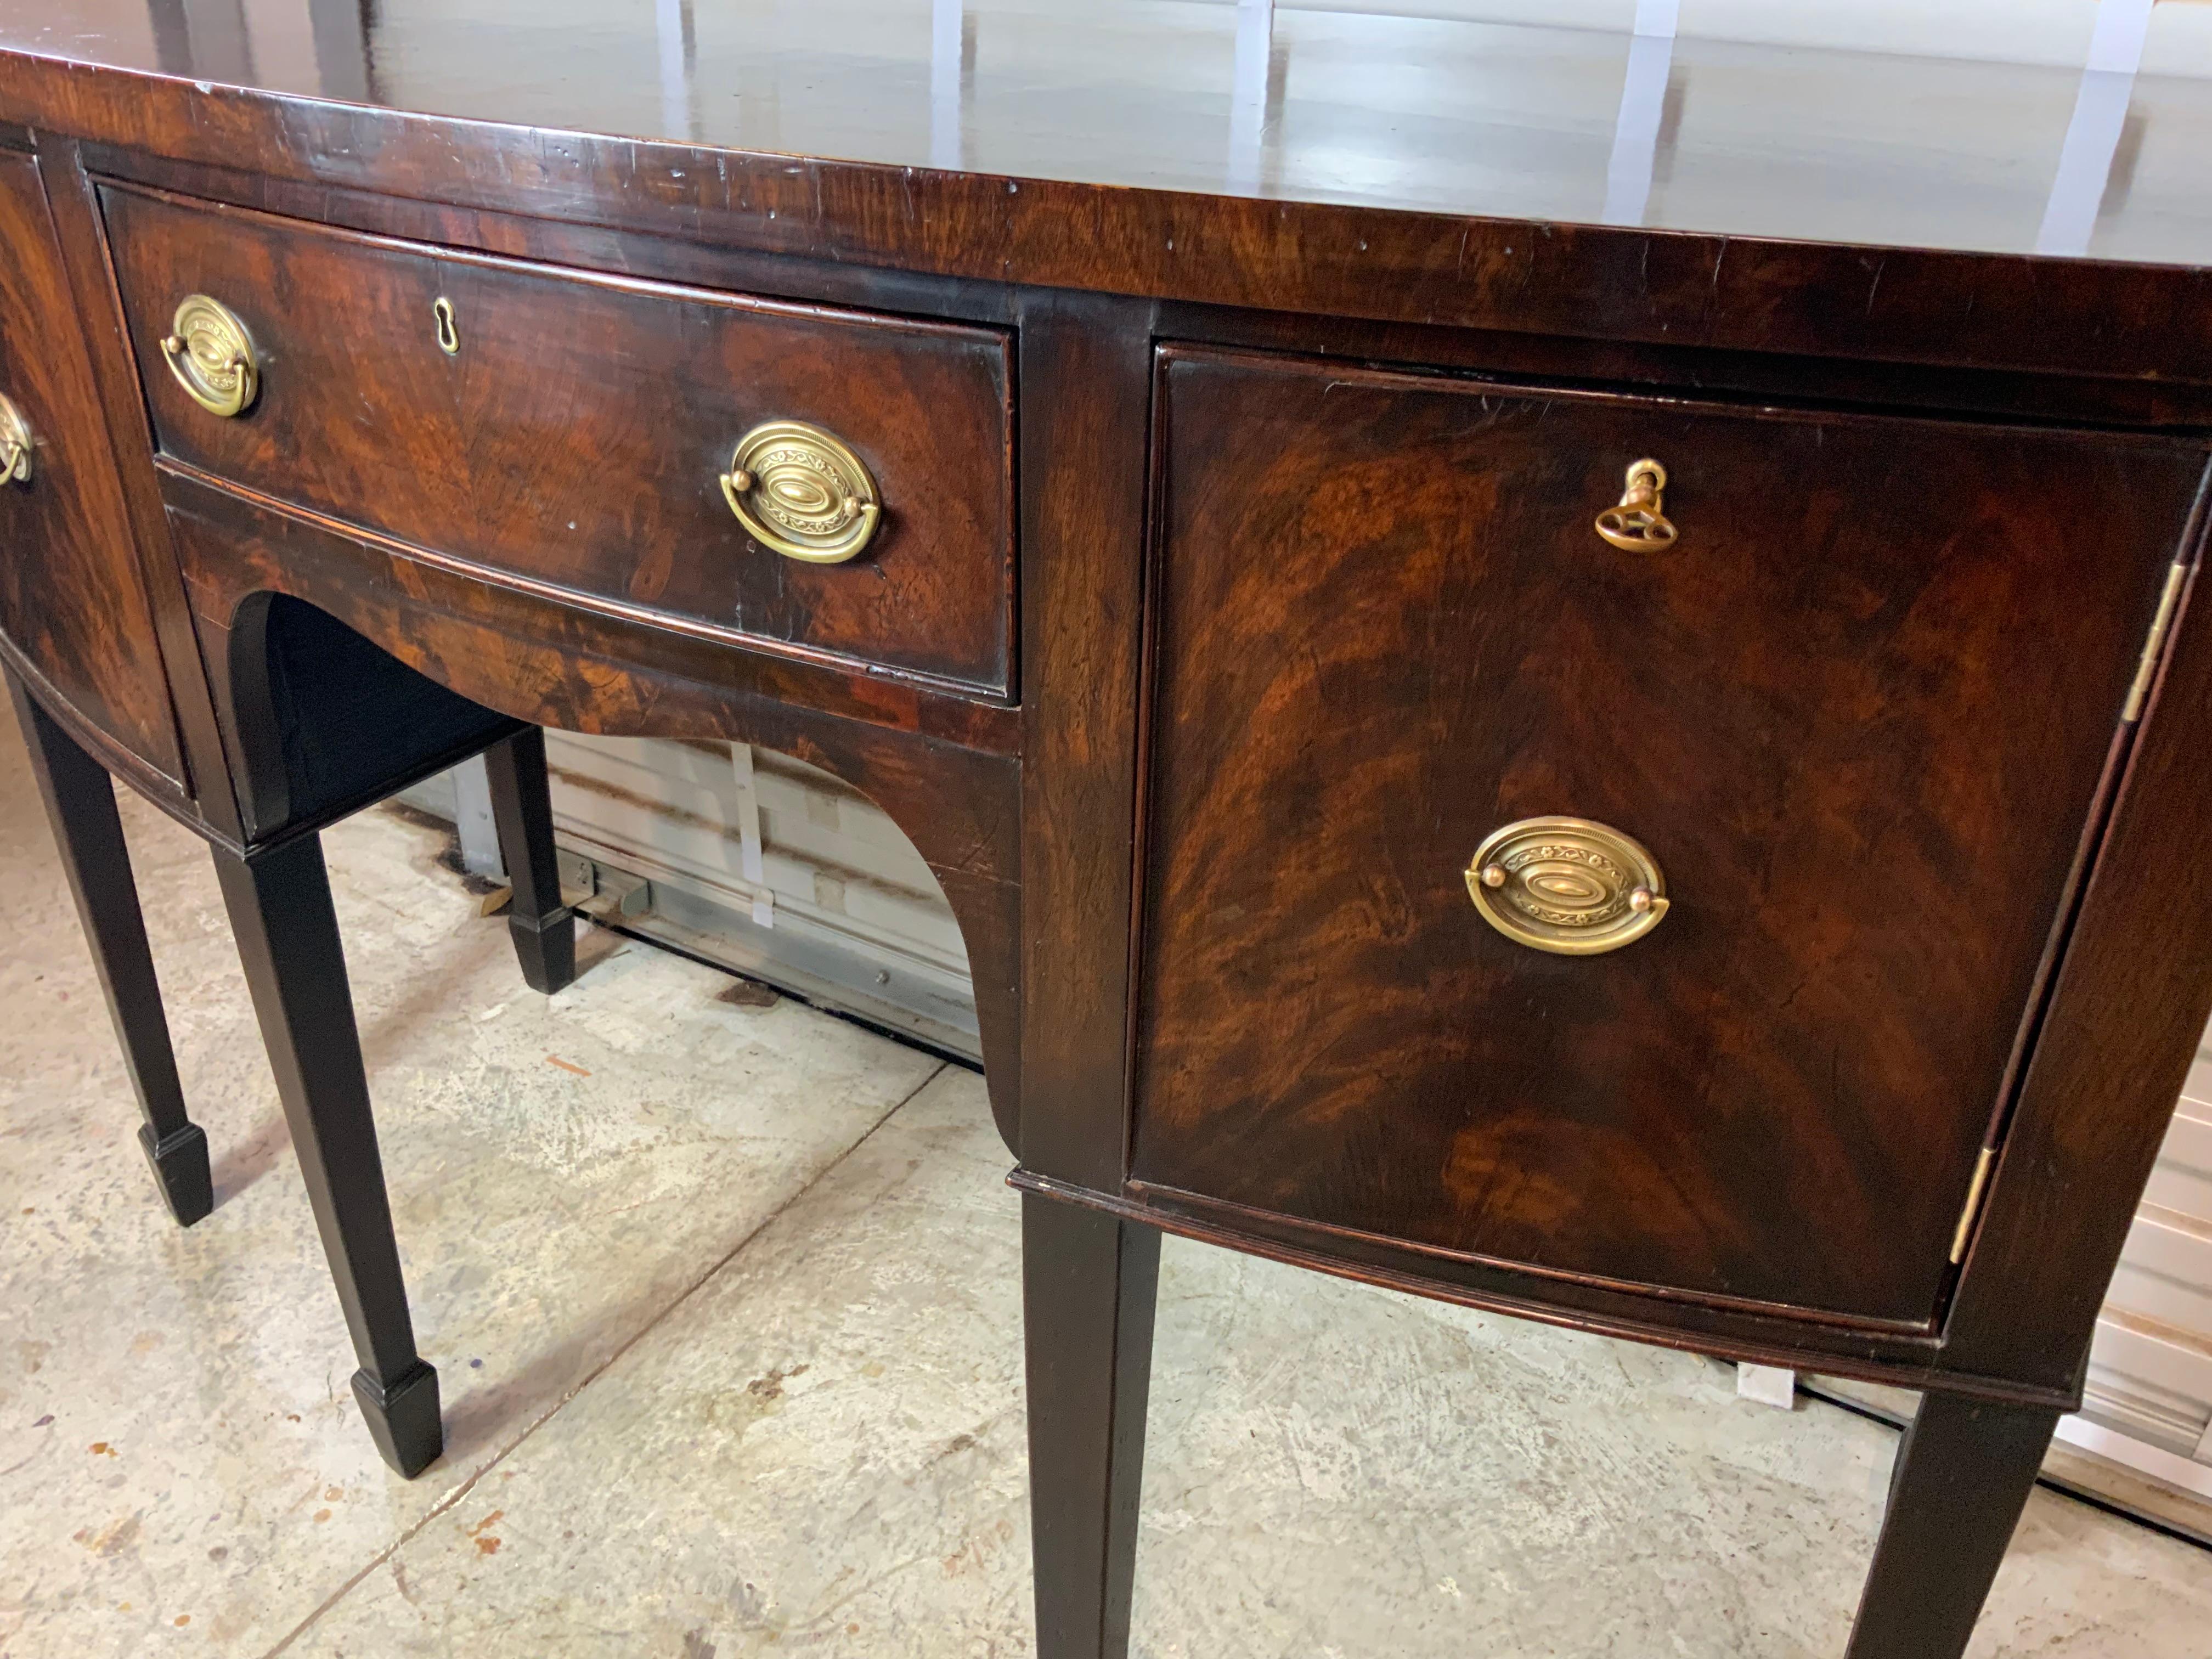  English Mahogany Sideboard In Good Condition For Sale In Bradenton, FL